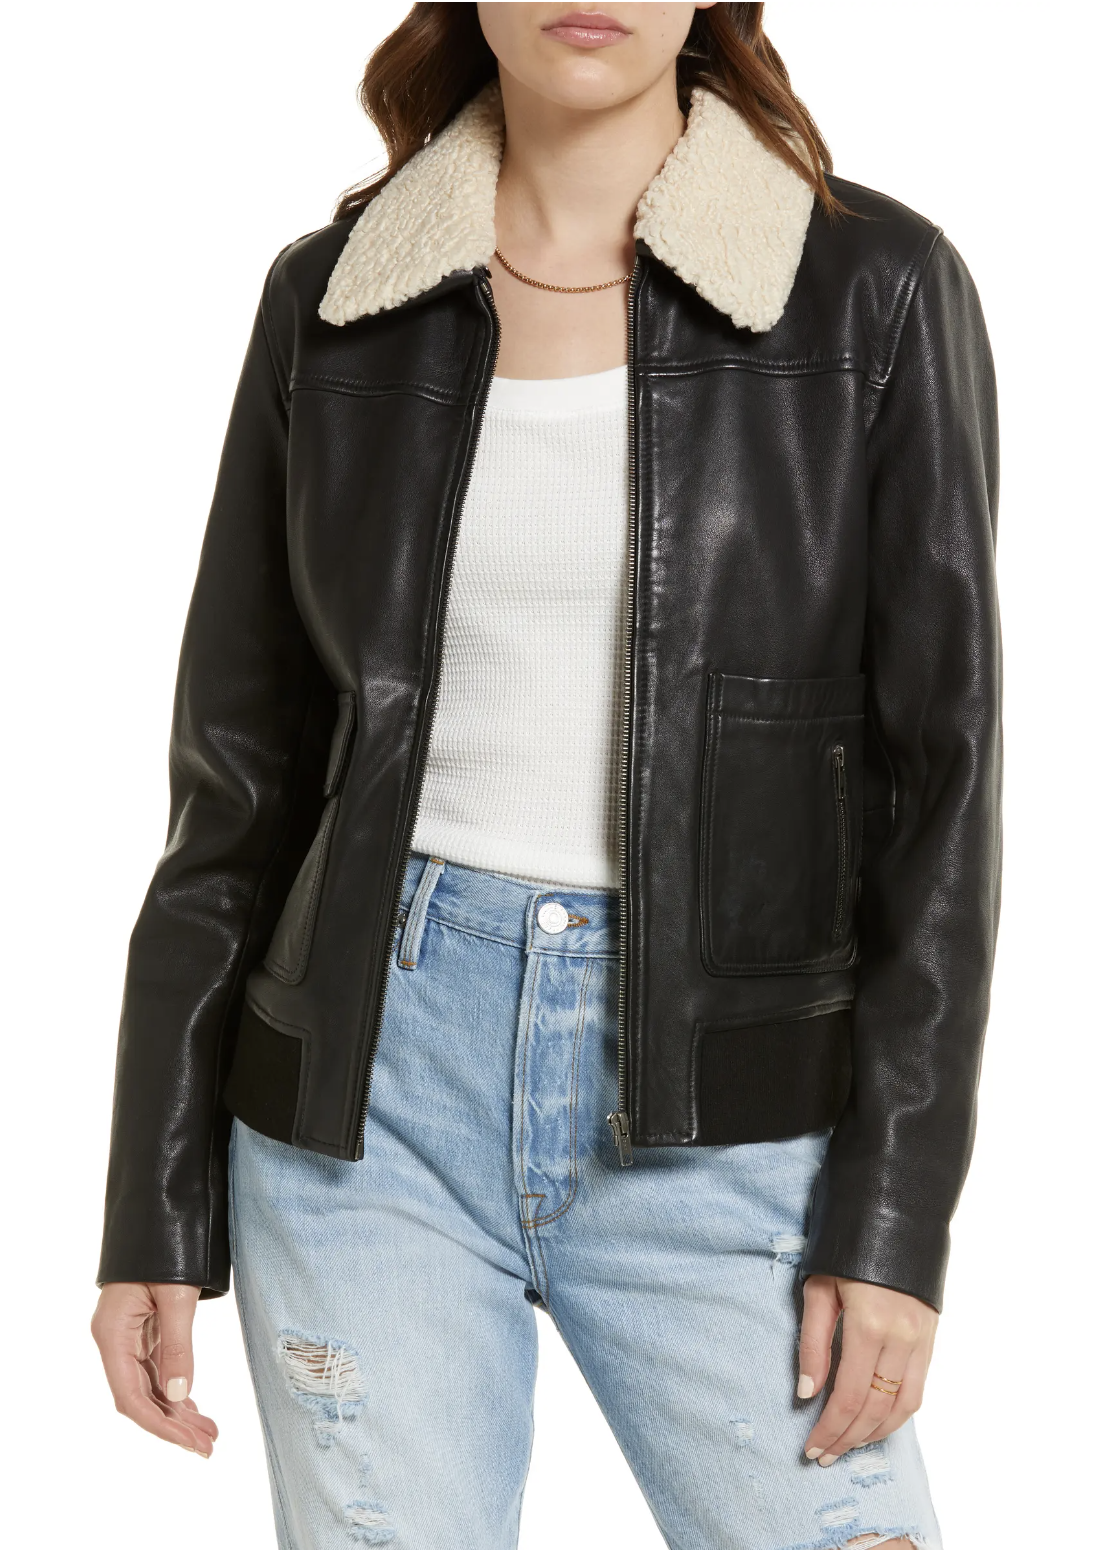 Bomber Jackets are one of my favorite Fall 2022 Jacket Trends